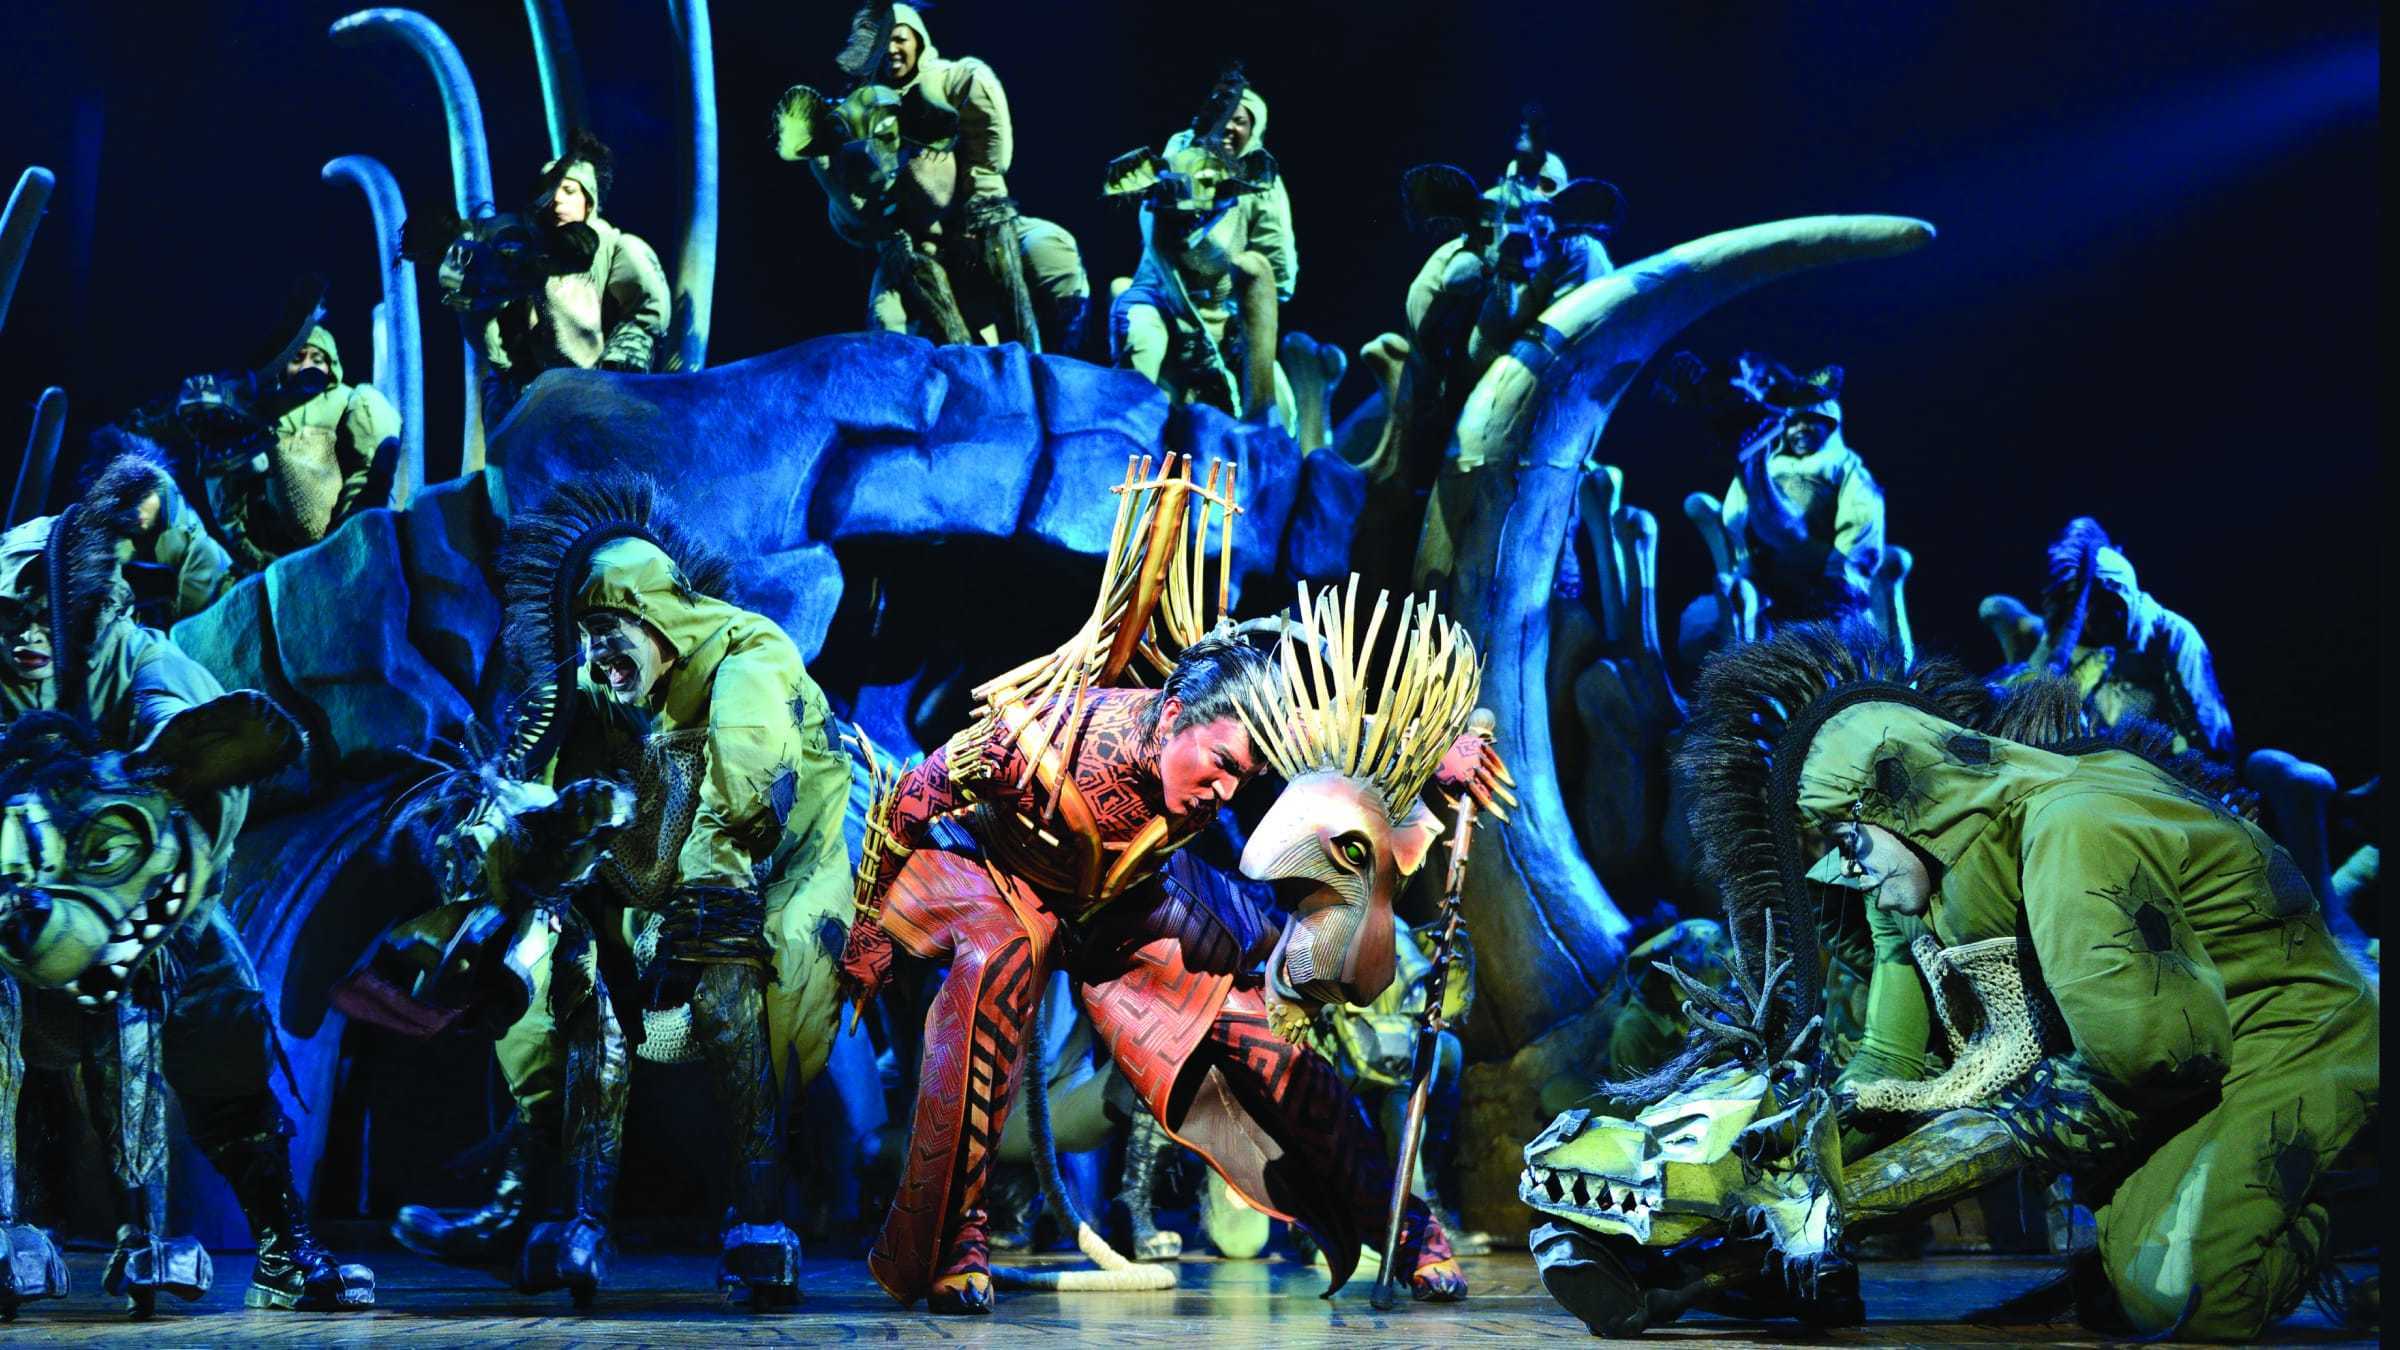 Scar character in costume with cast members in Hyena costumes.